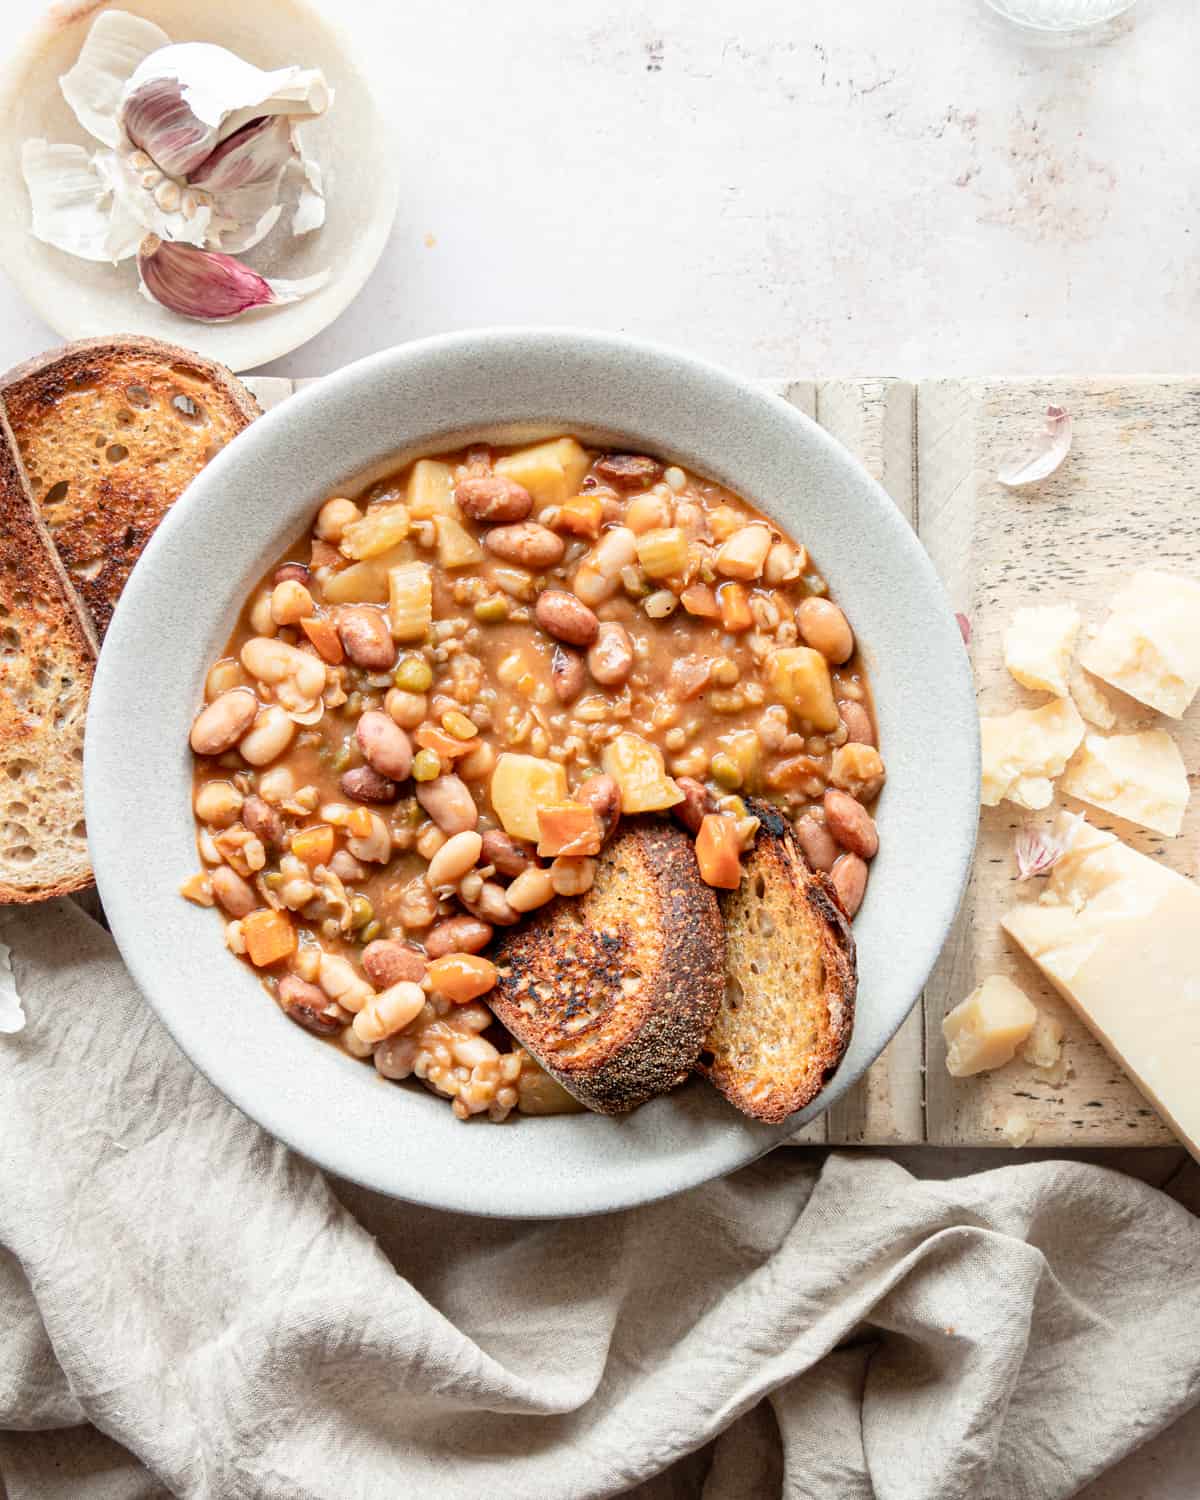 Beans soup in a bowl with 2 slices of bread next to some pieces of Parmigiano Reggiano.